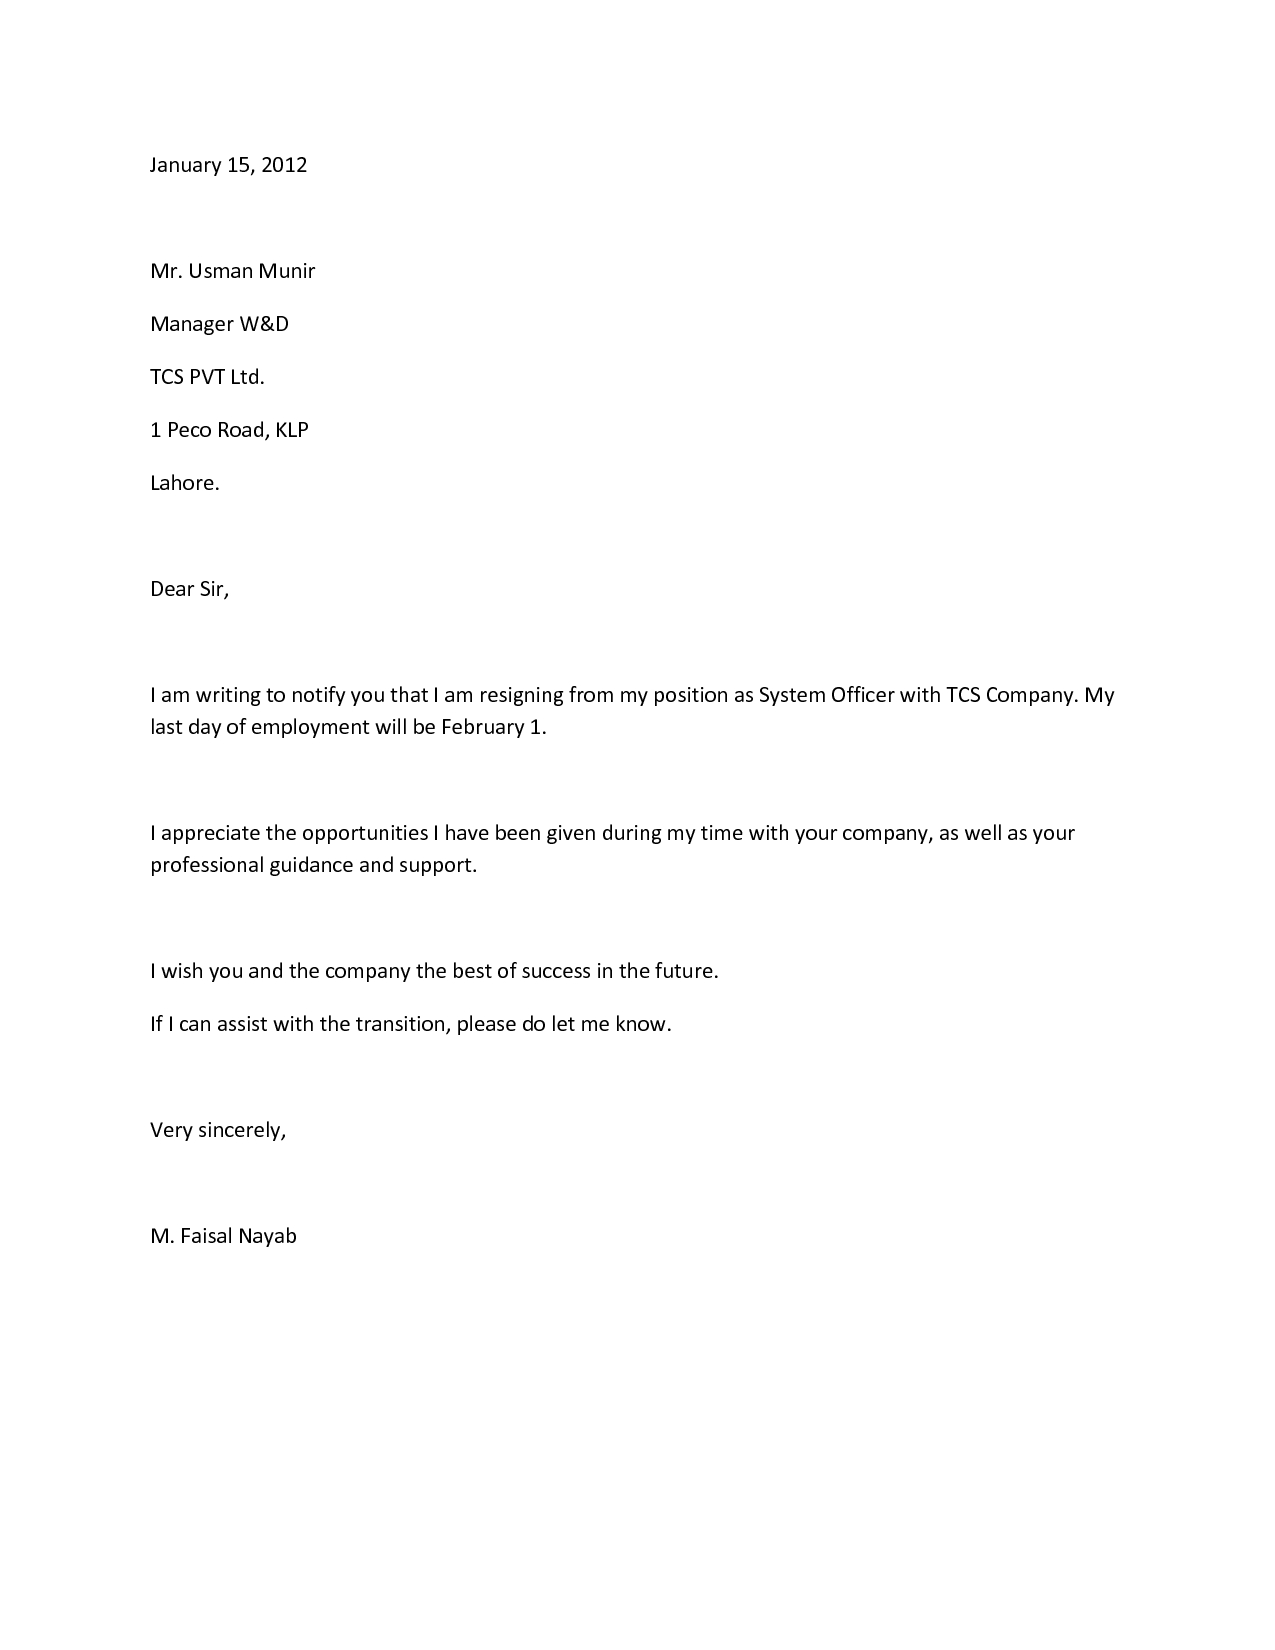 Basic Resignation Letter Template - How to Write A Proper Resignation Letter Images